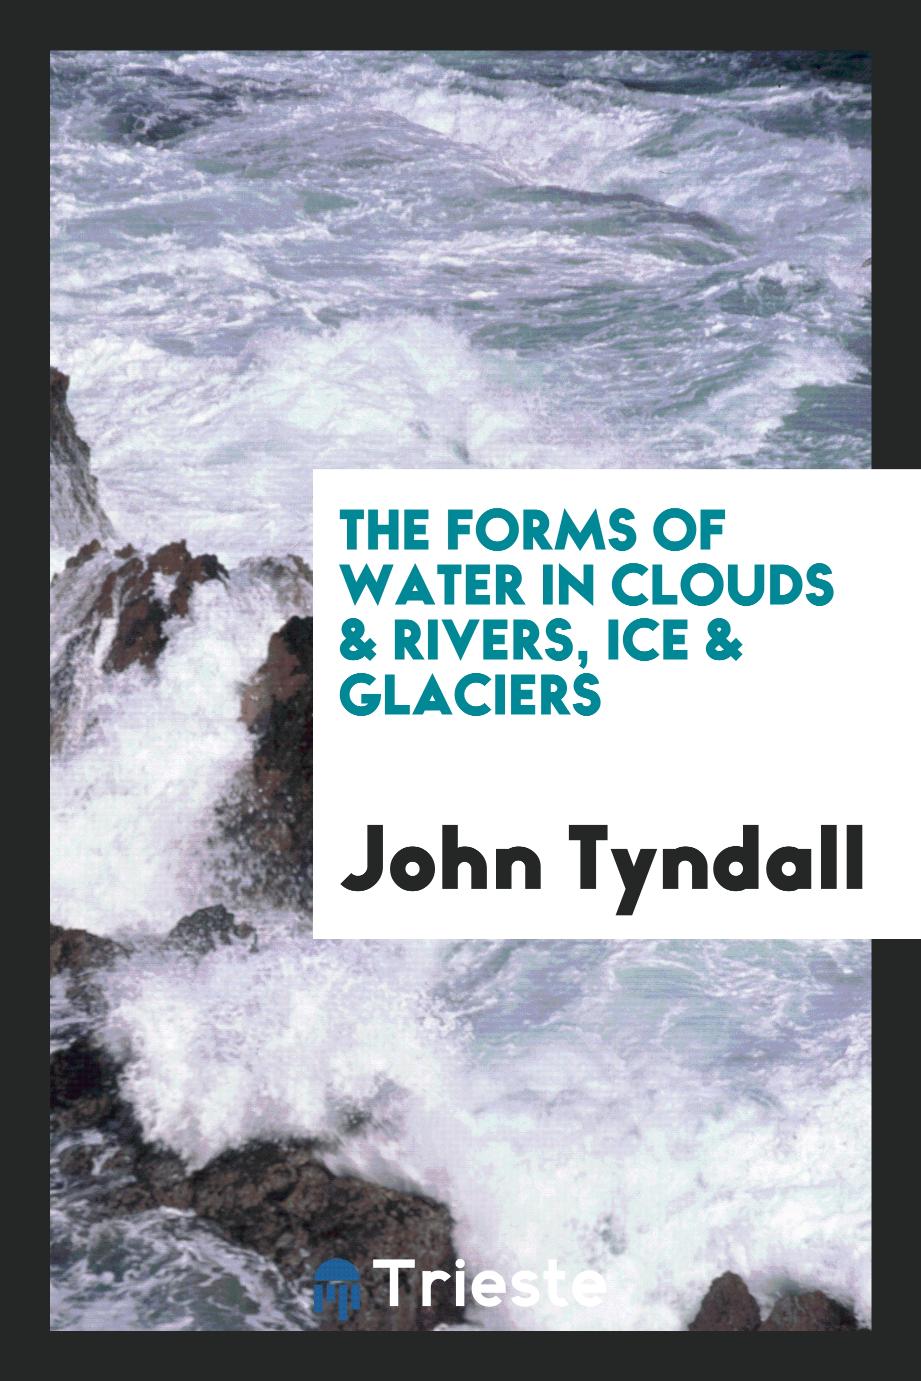 The forms of water in clouds & rivers, ice & glaciers